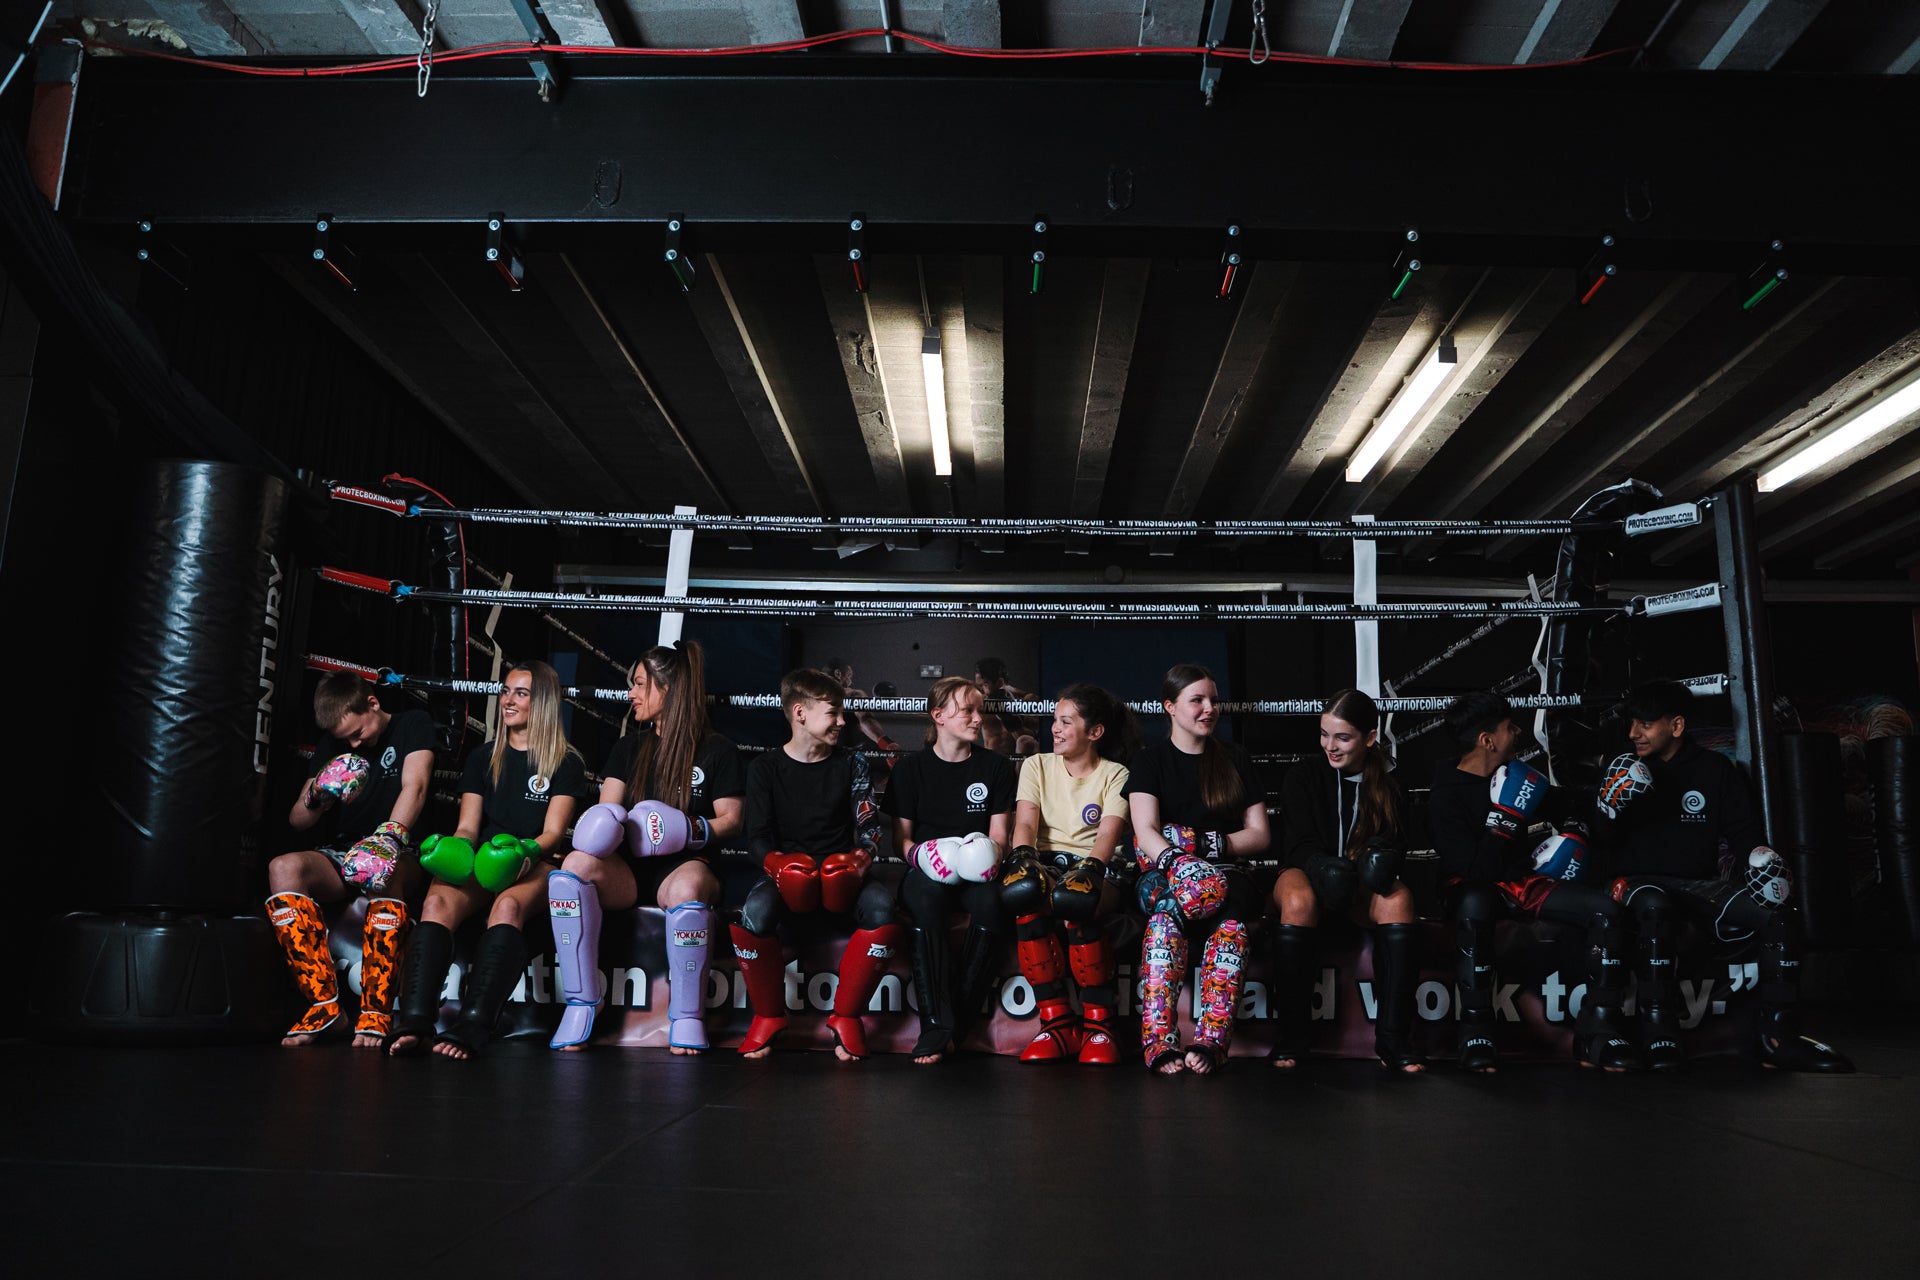 A photo of a number of Evade Martial Arts students sitting on the edge of the Kickboxing Tameside Boxing ring as part of the Evade Martial Arts Tameside and Children's Martial Arts Tameside programs